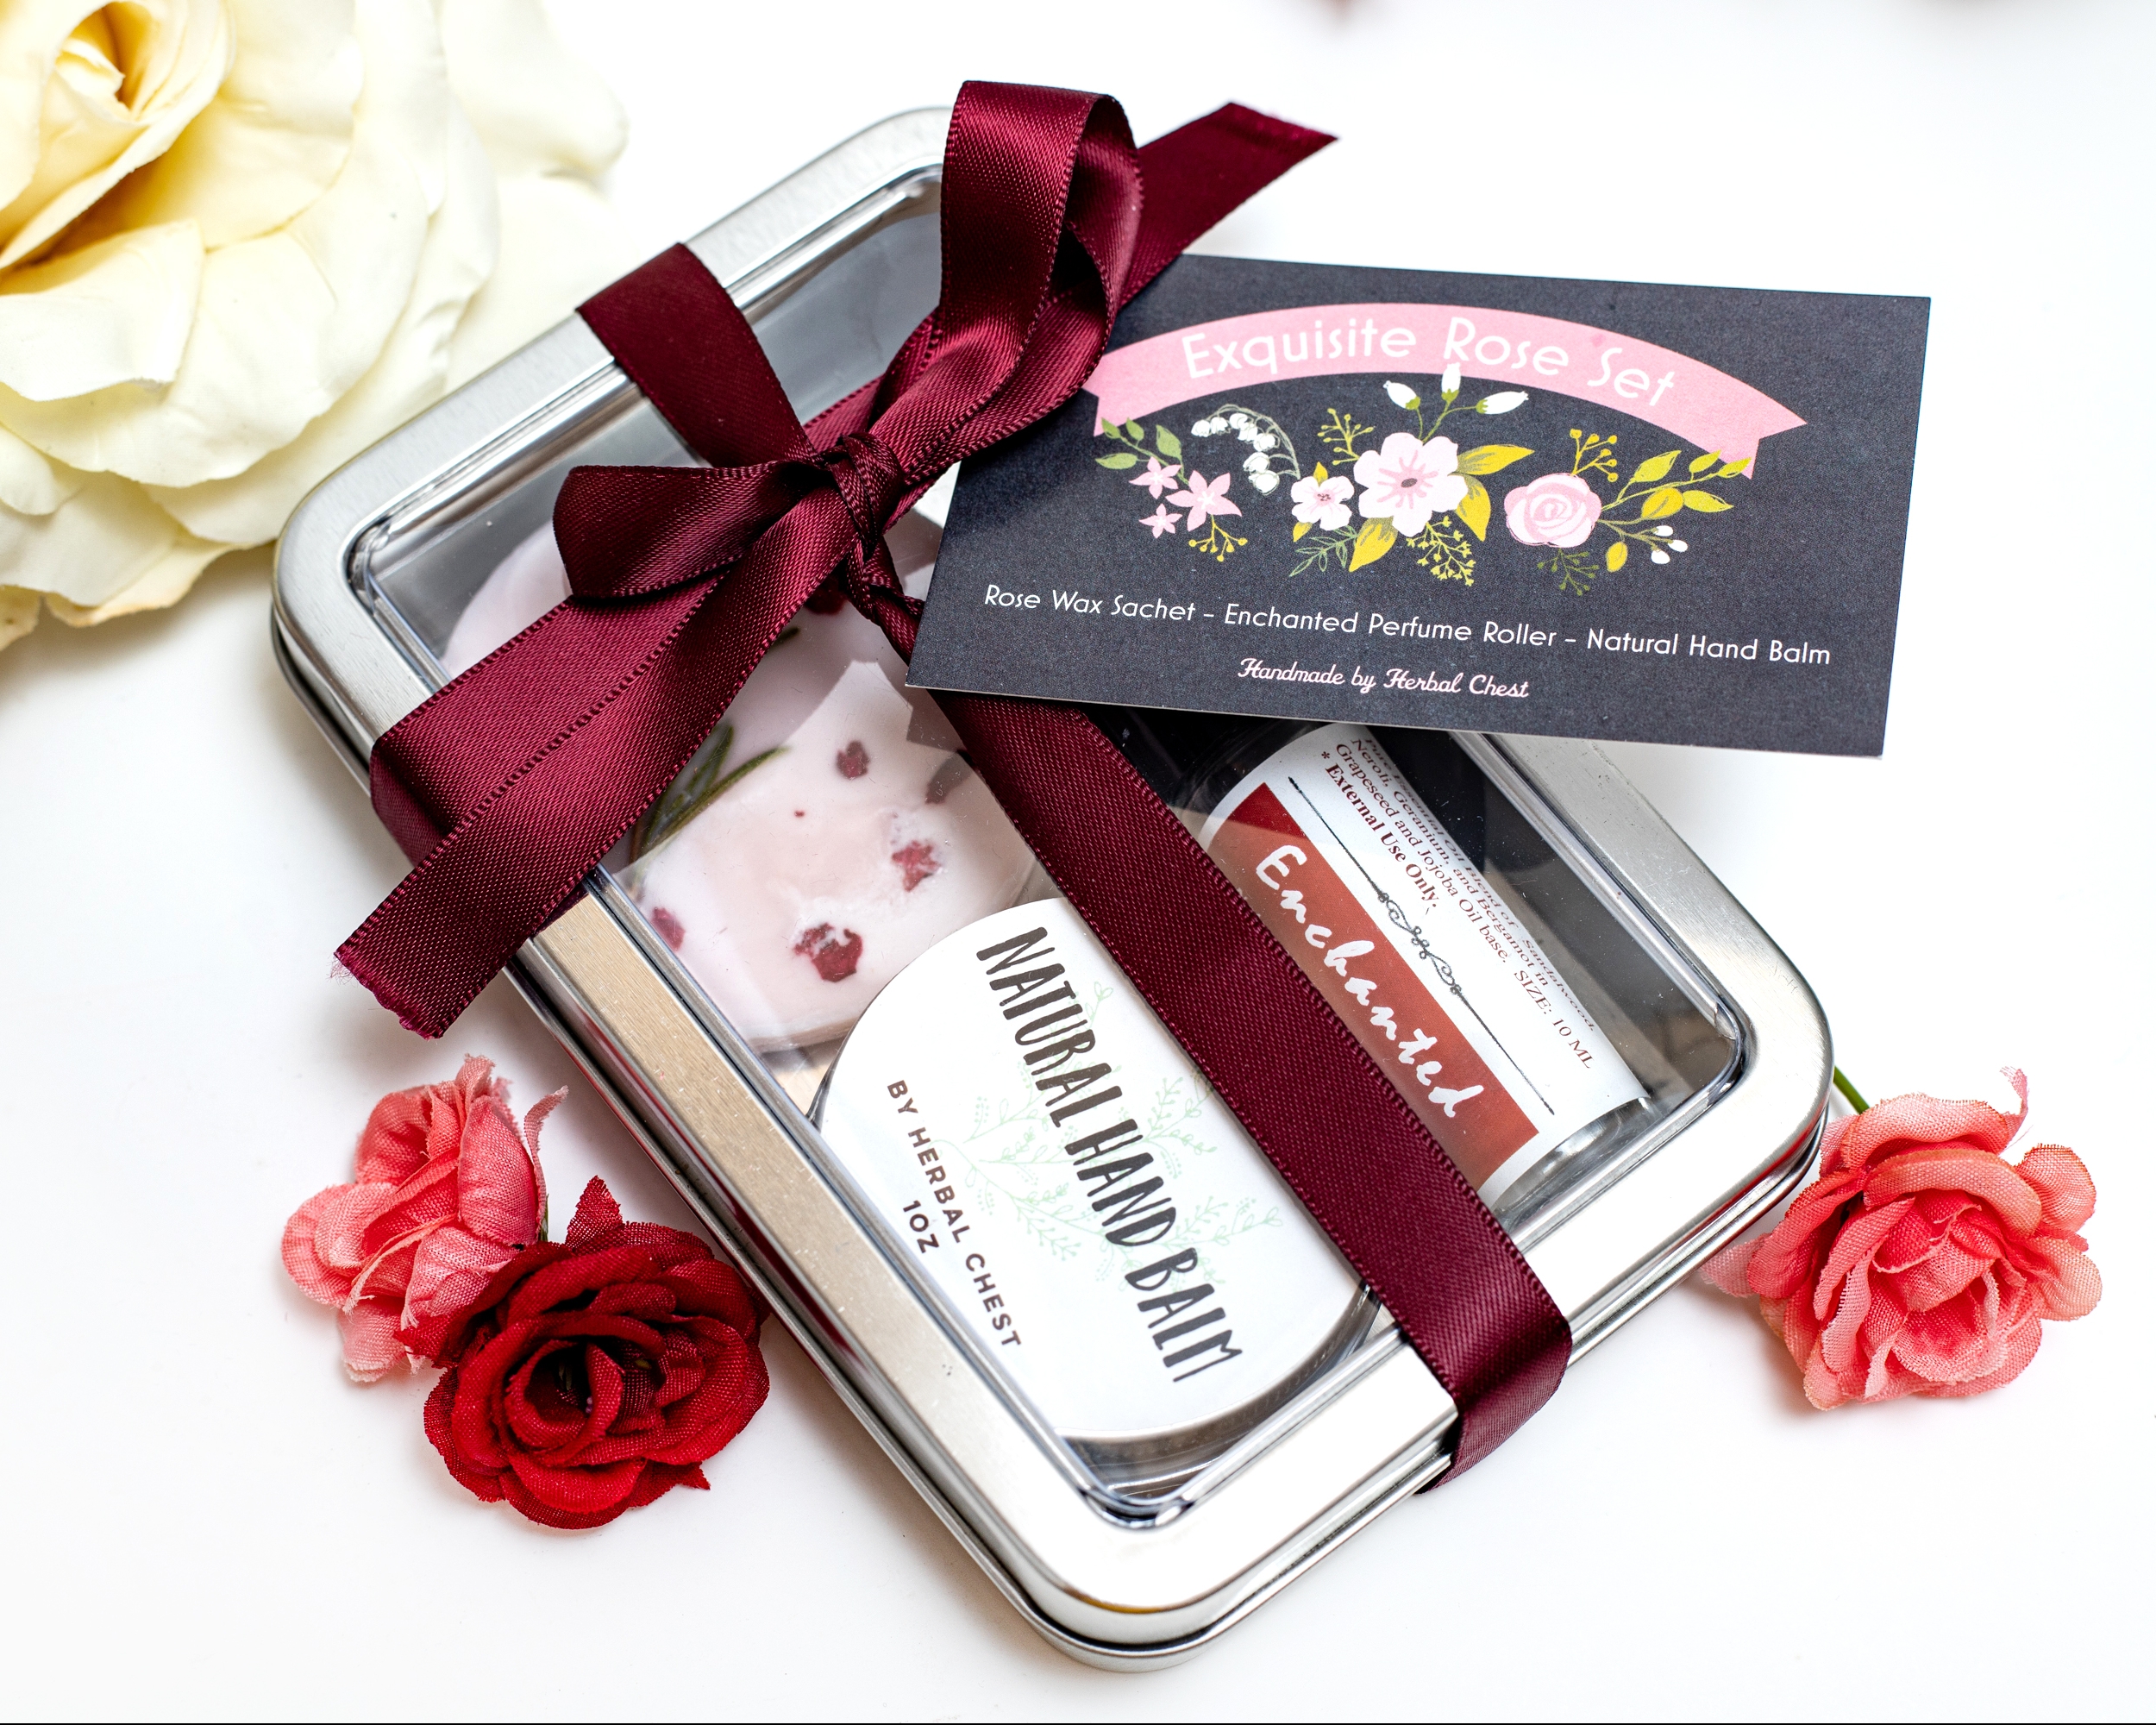 Exquisite Rose Gift Set, scented soy wax sachet, hanging home decor, home fragrance, fragrant tablet, natural hand balm, nourishing healing moisturizer, aromatherapy perfume oil roller in metal tin box